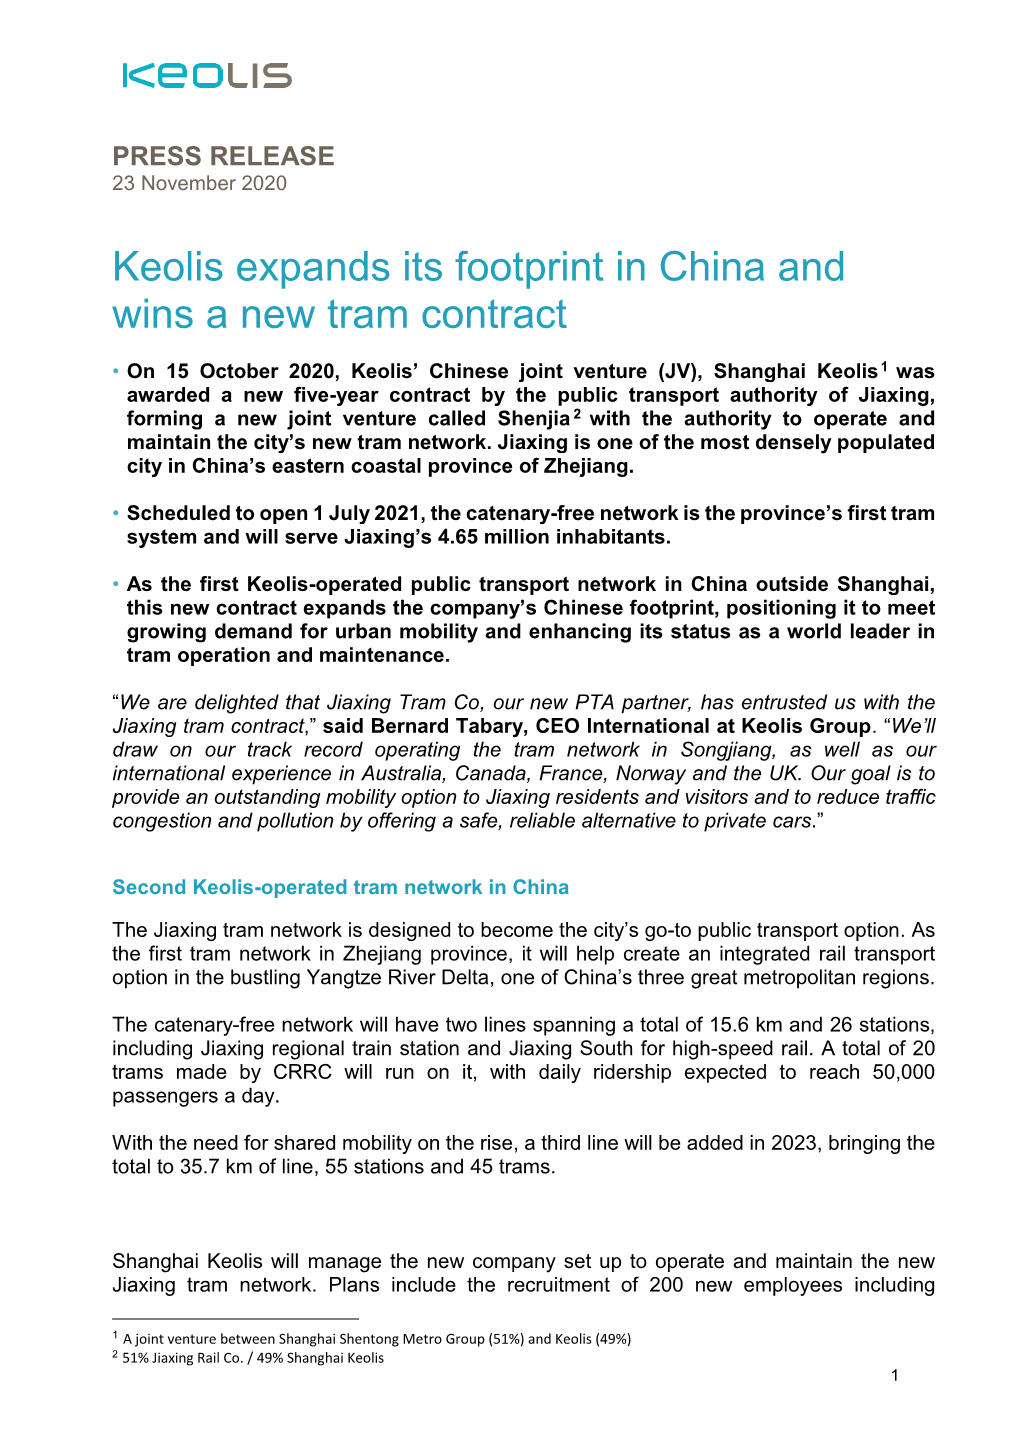 Keolis Expands Its Footprint in China and Wins a New Tram Contract (Pdf)